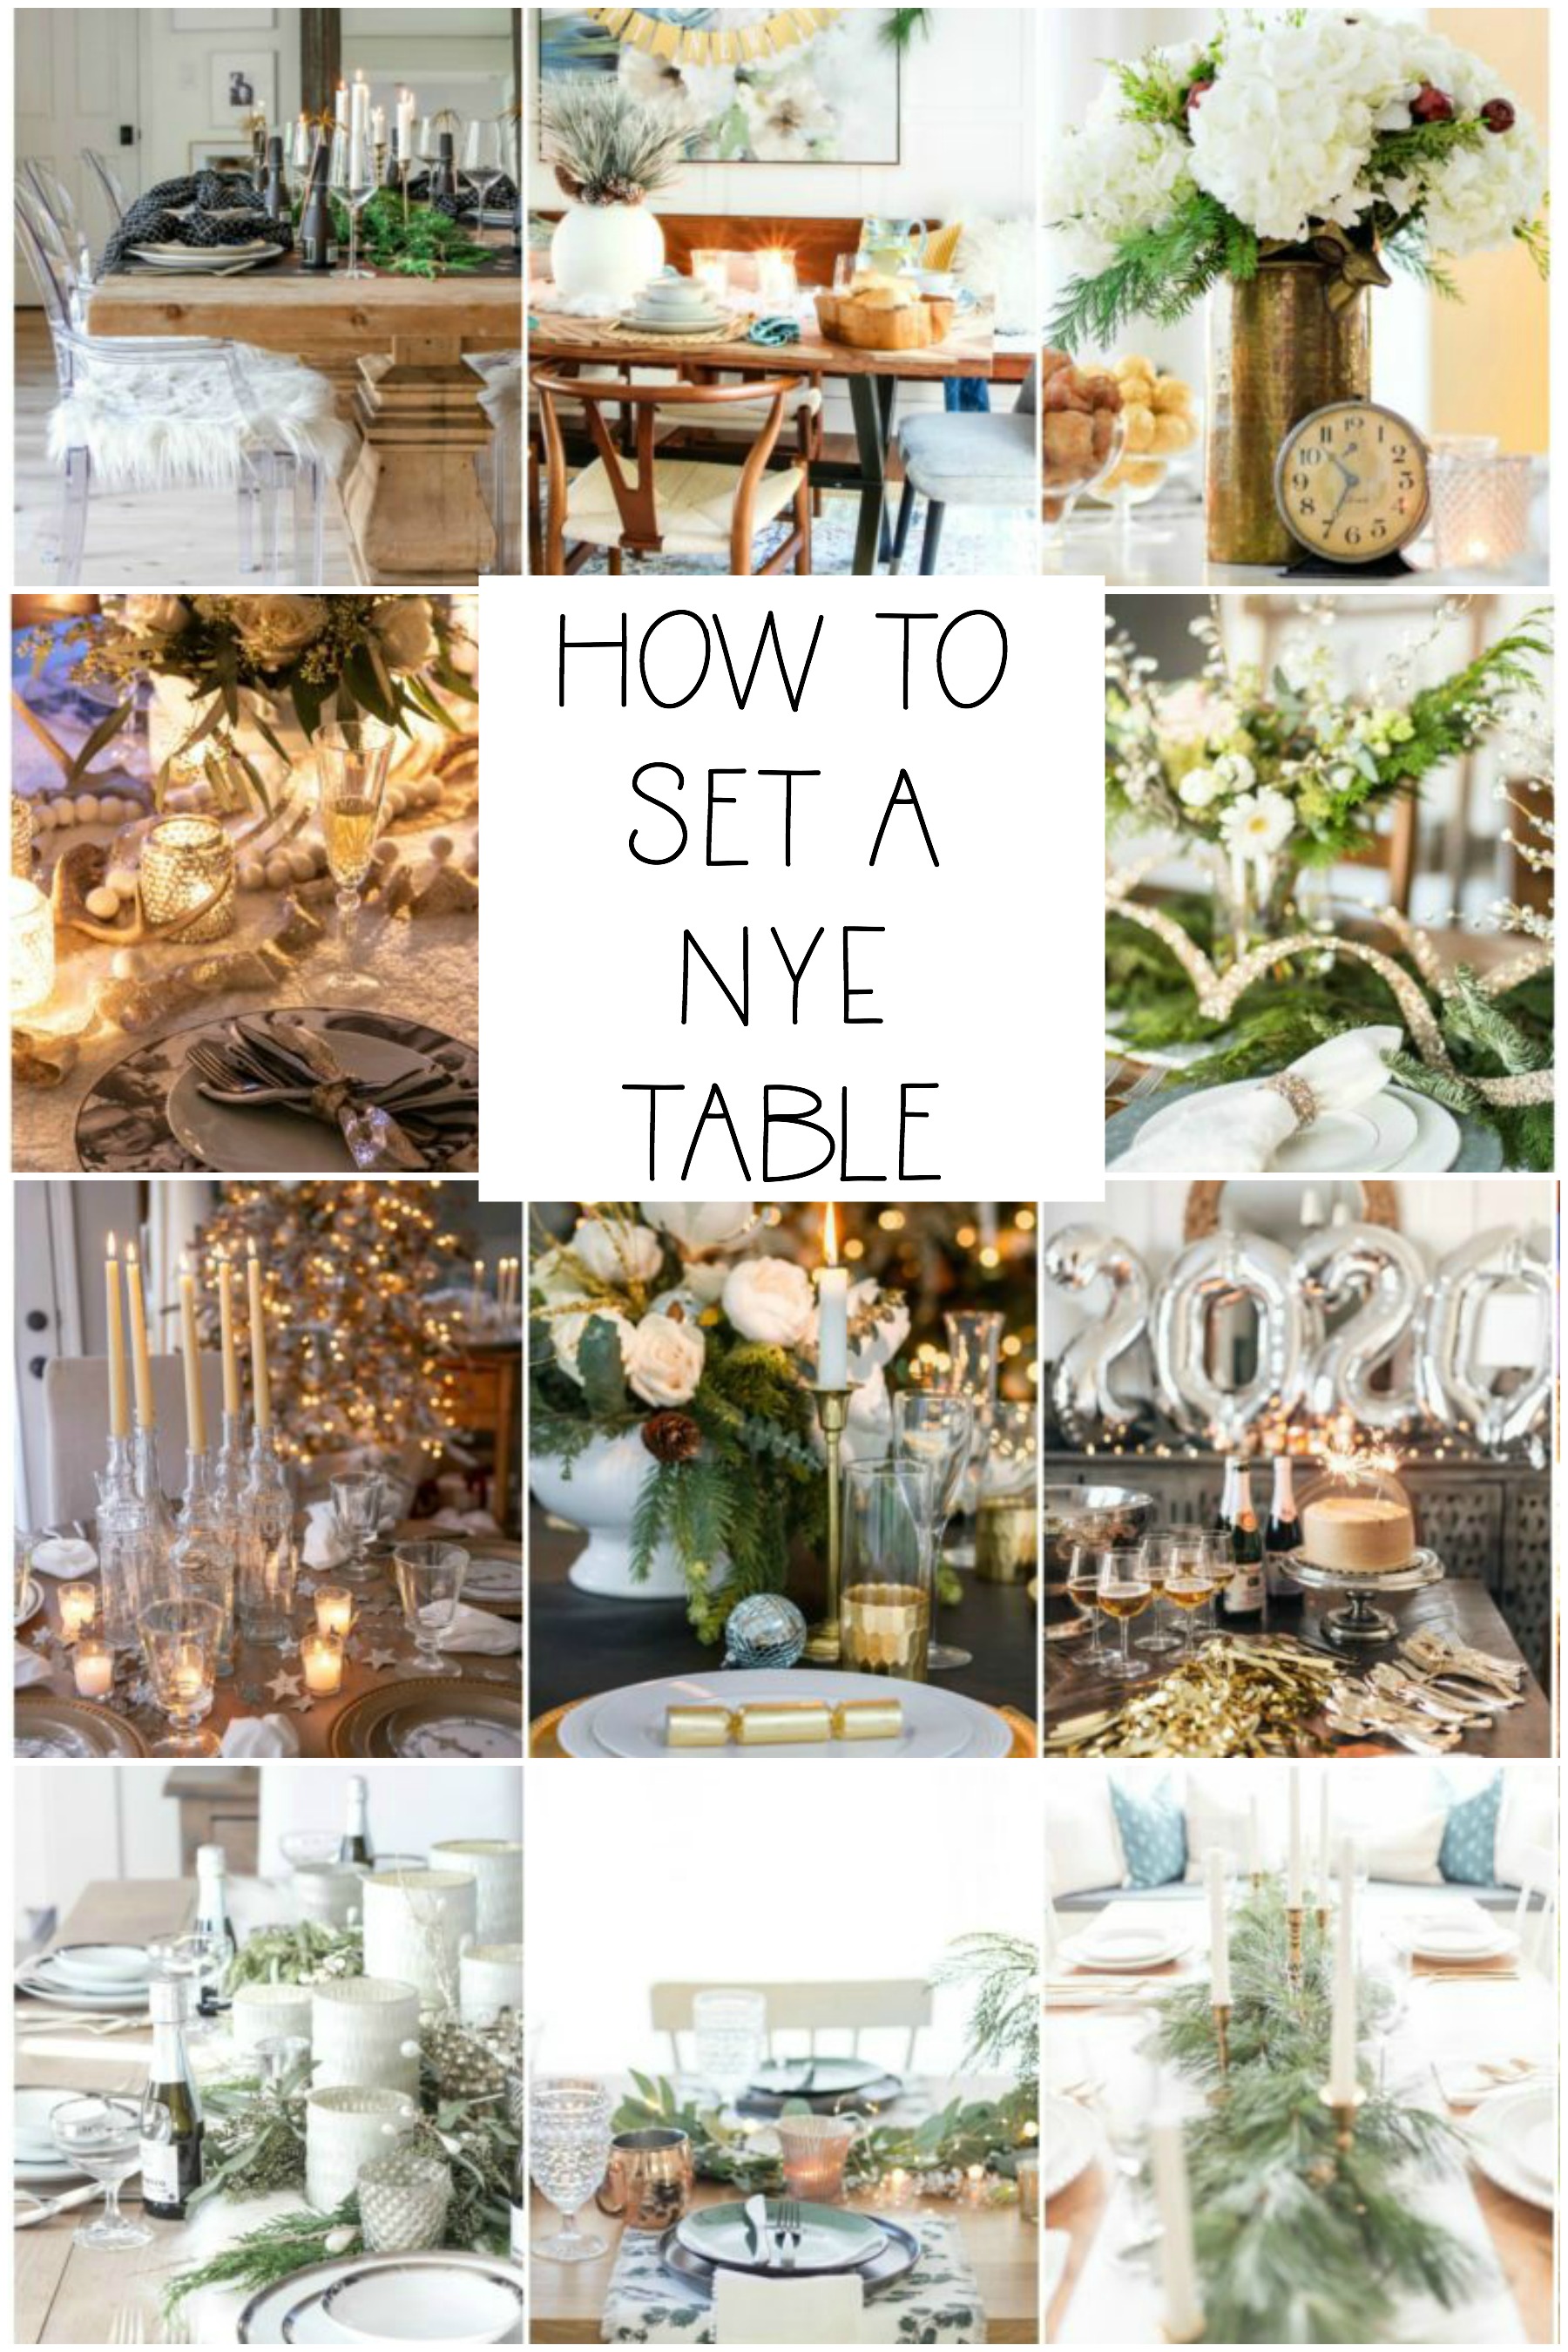 How to set a NYE table poster.